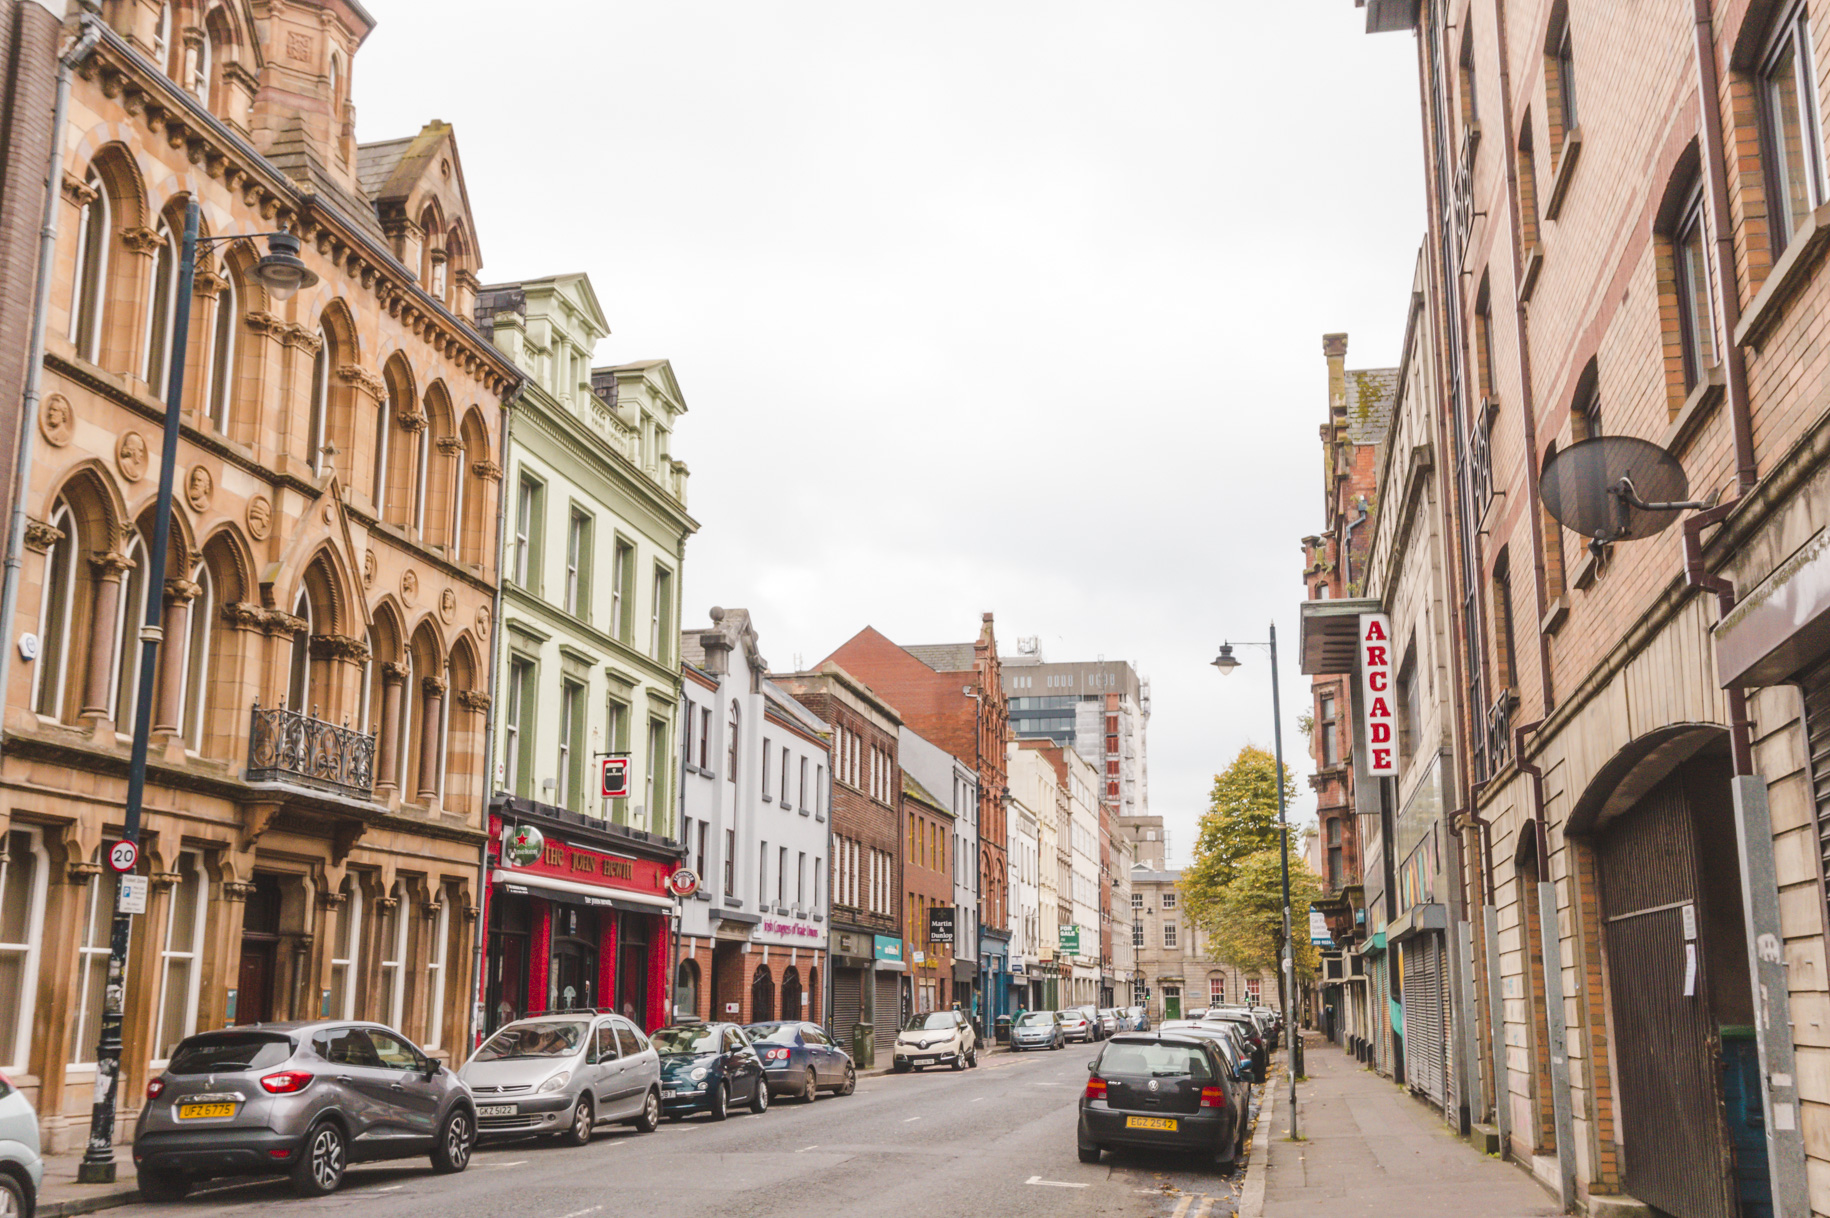 Victorian buildings in Belfast, Northern Ireland. Add Belfast to your Europe itinerary.